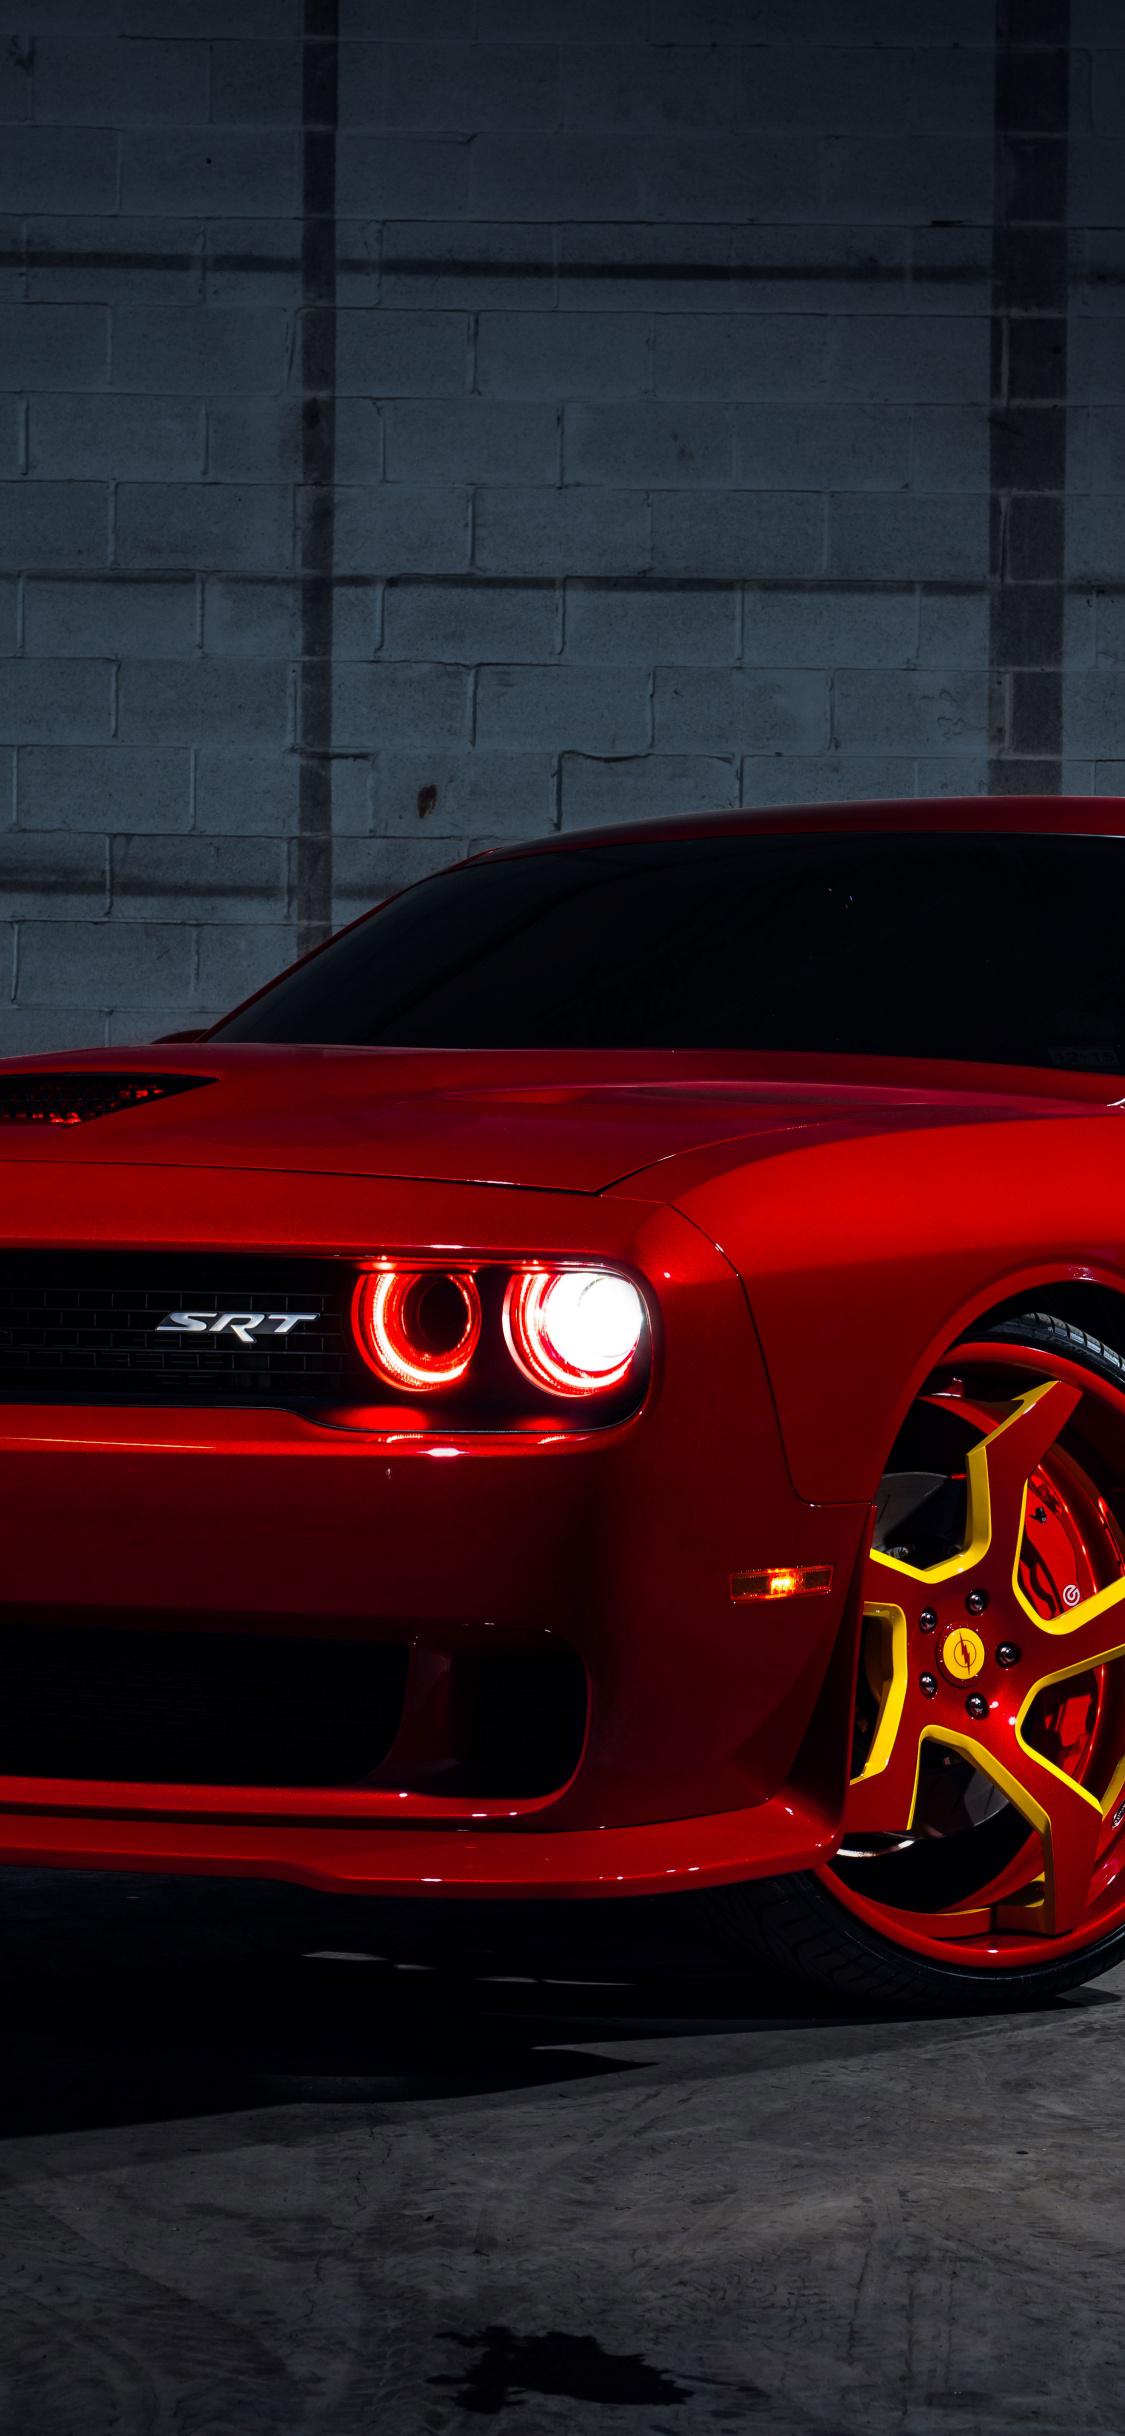 Cars Wallpapers  Page 10 of 28  iPhone Wallpapers  iPhone Wallpapers   Dodge challenger srt Challenger srt demon Dodge challenger srt hellcat